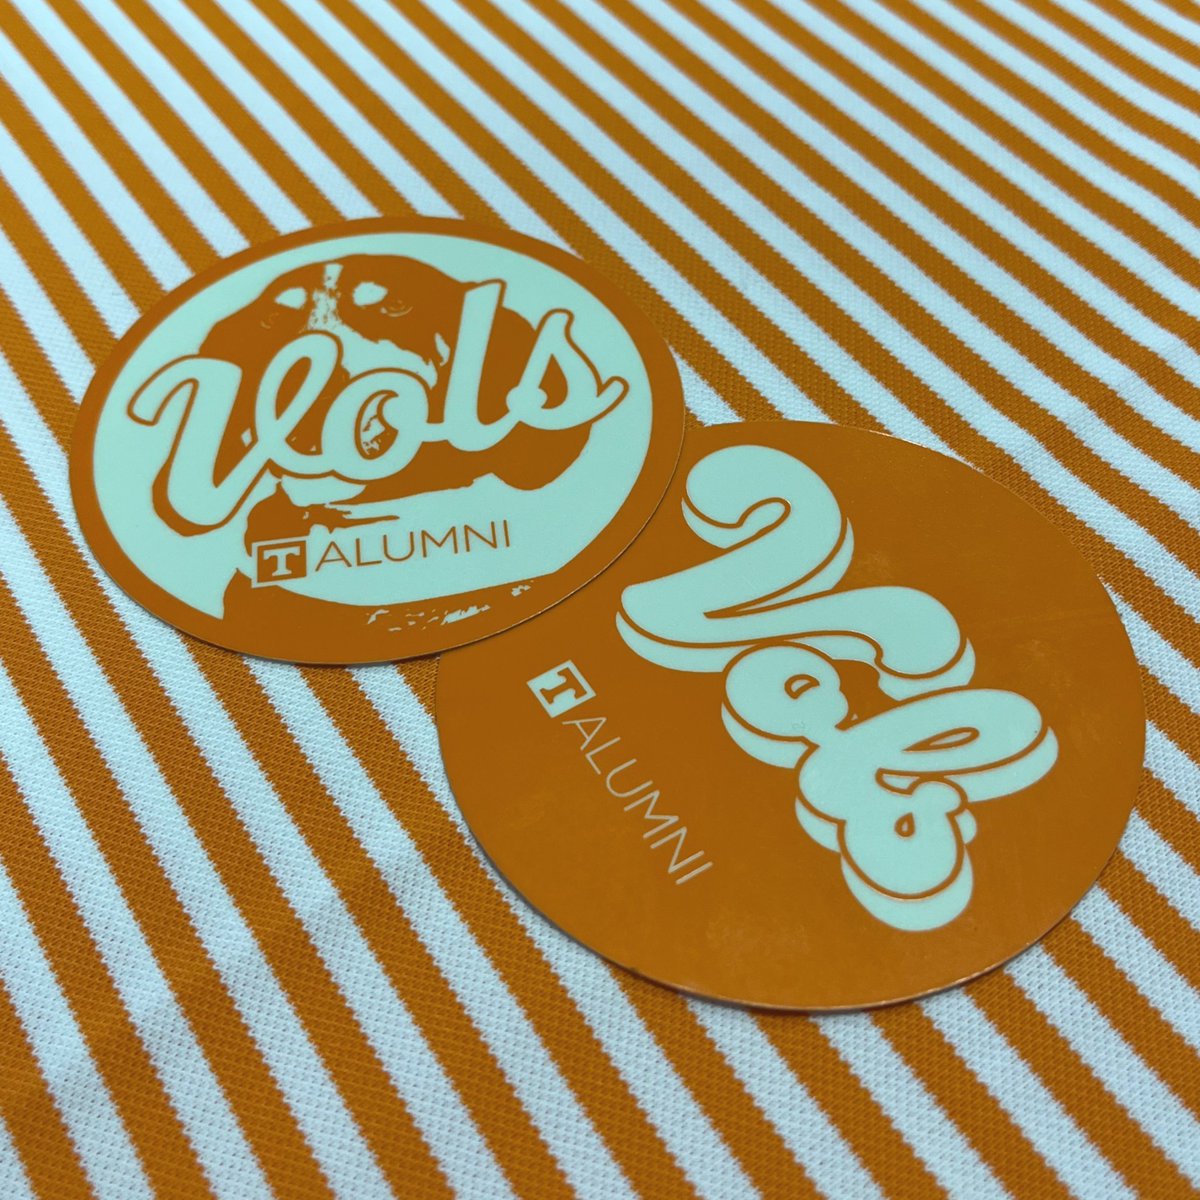 Let your brand shine with custom stickers! We recently partnered with UT Alumni on these glow in the dark stickers and they turned out great. ⭐ #graphiccreations #stickers #utalumni #glowinthedark #custompromotionalproduct